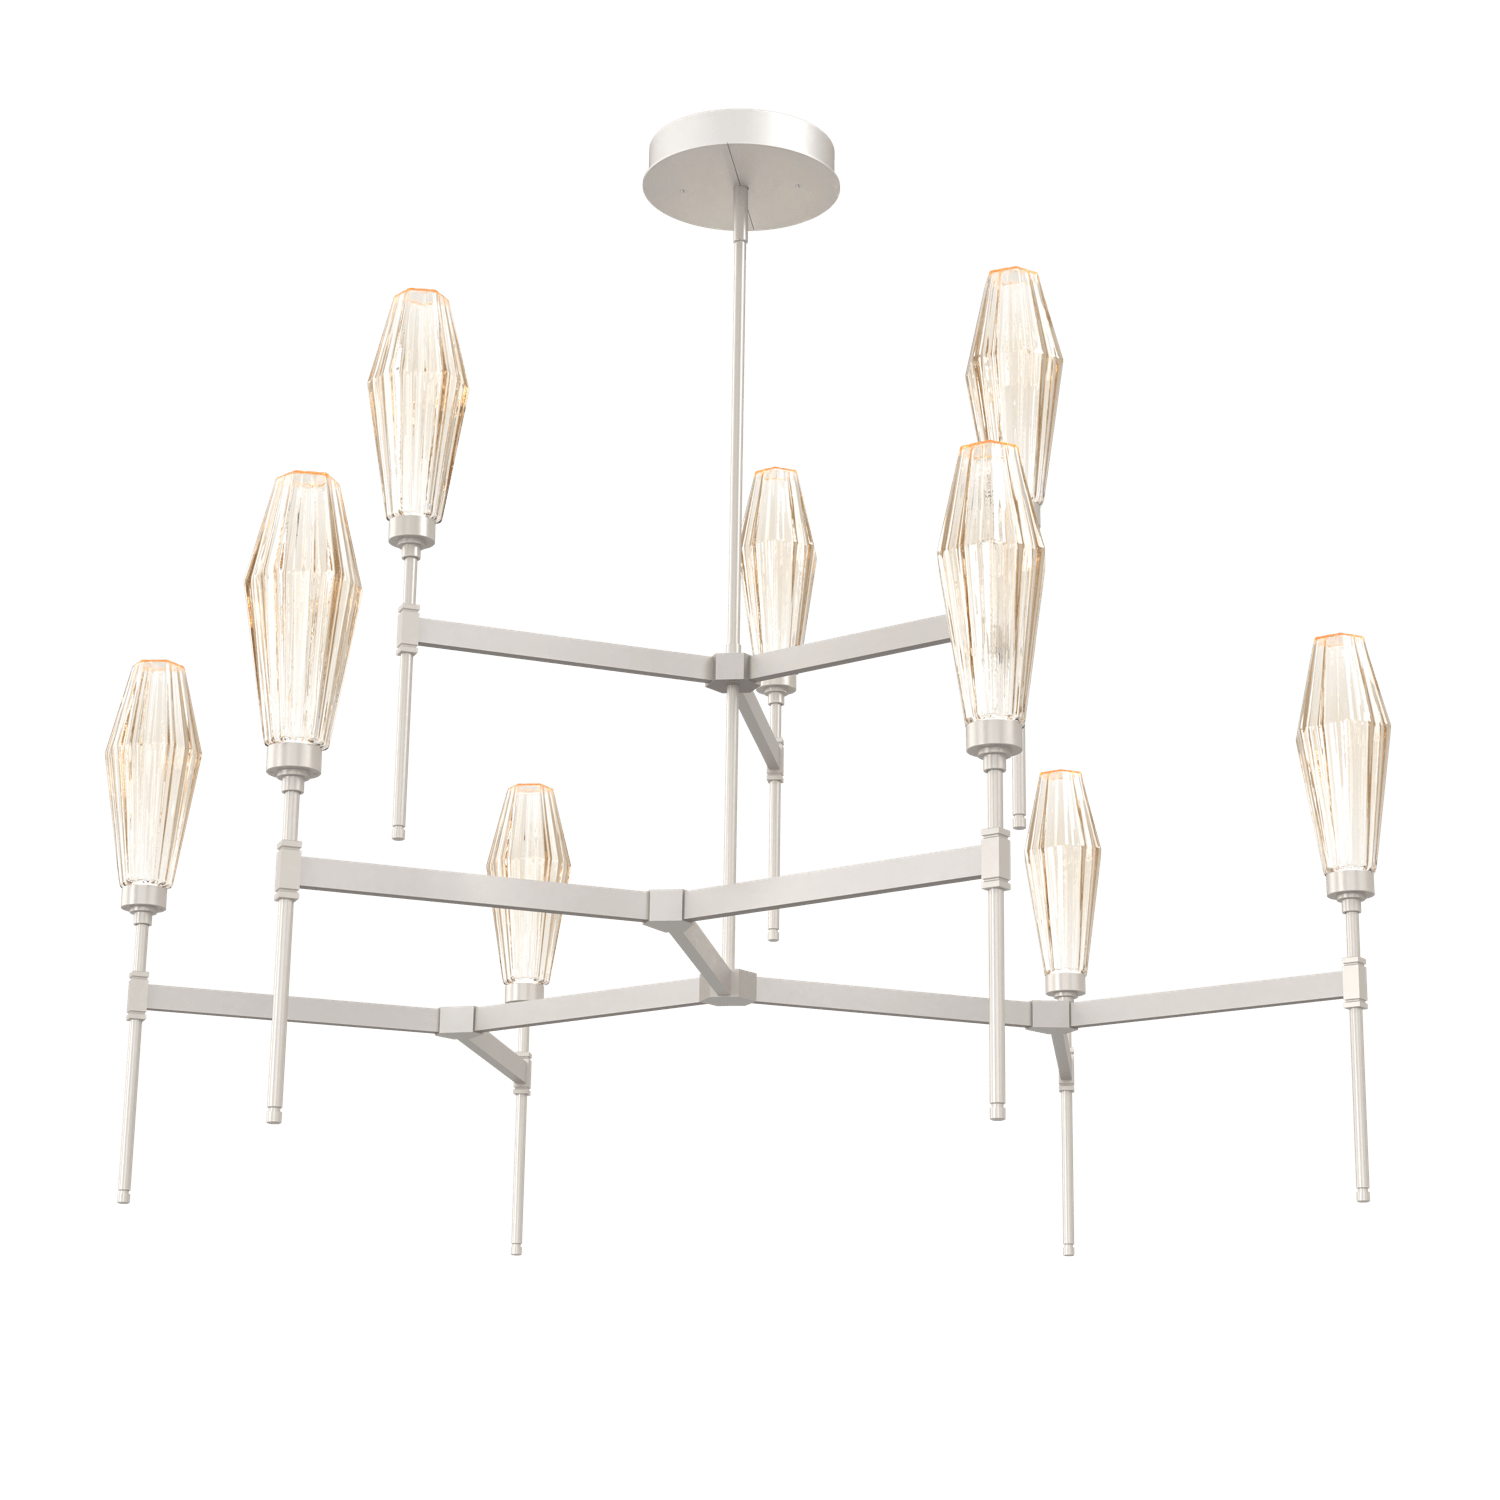 CHB0049-54-BS-RA-Hammerton-Studio-Aalto-54-inch-round-two-tier-belvedere-chandelier-with-metallic-beige-silver-finish-and-optic-ribbed-amber-glass-shades-and-LED-lamping